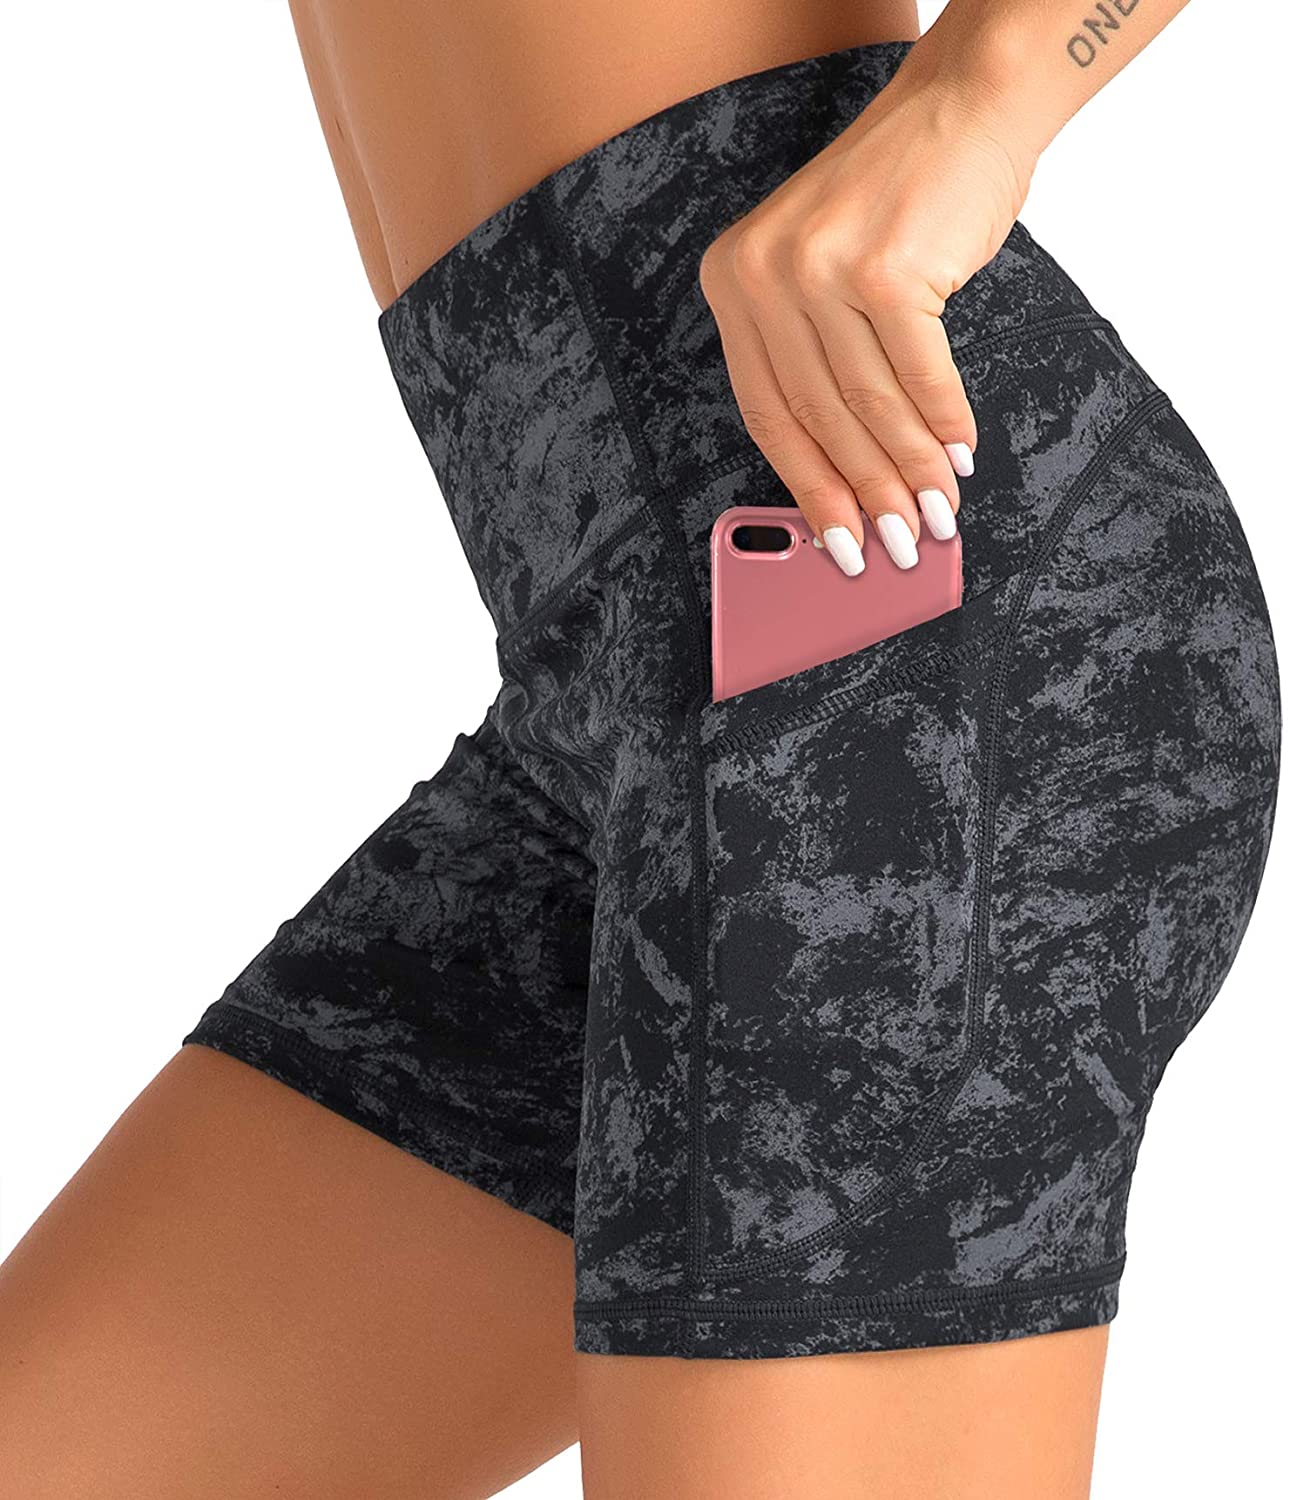 Dragon Fit High Waist Yoga Shorts for Women with 2 Side Pockets Tummy Control Running Home Workout Shorts 